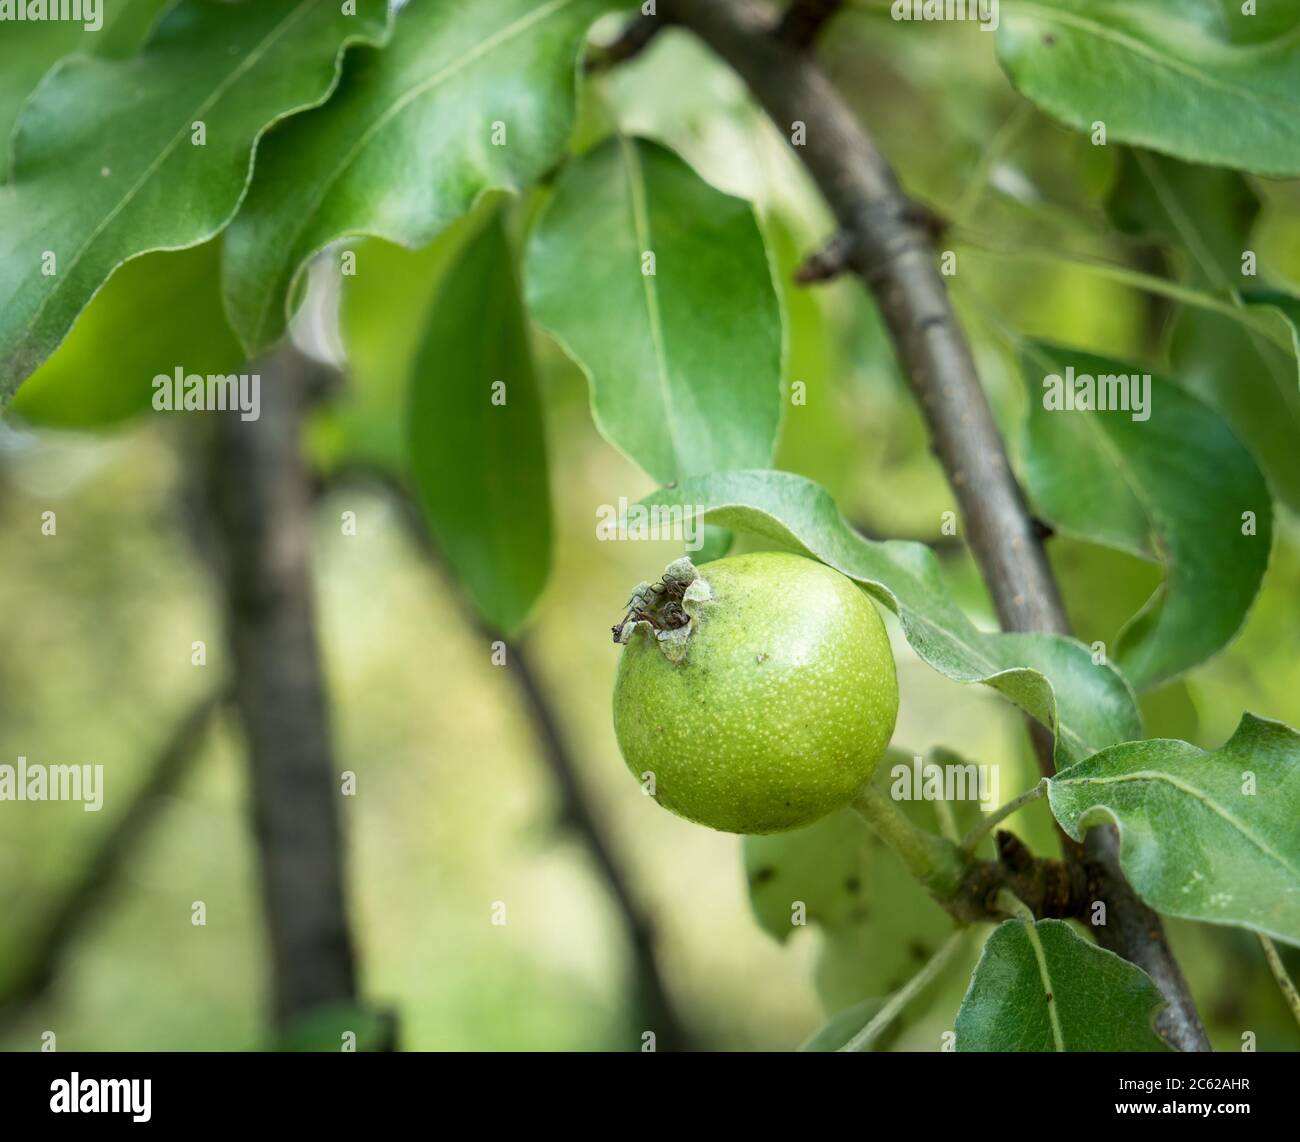 Pyrus elaeagrifolia or the oleaster-leafed pear fruit hanging on a tree branch. Single isolated fresh green fruit Stock Photo